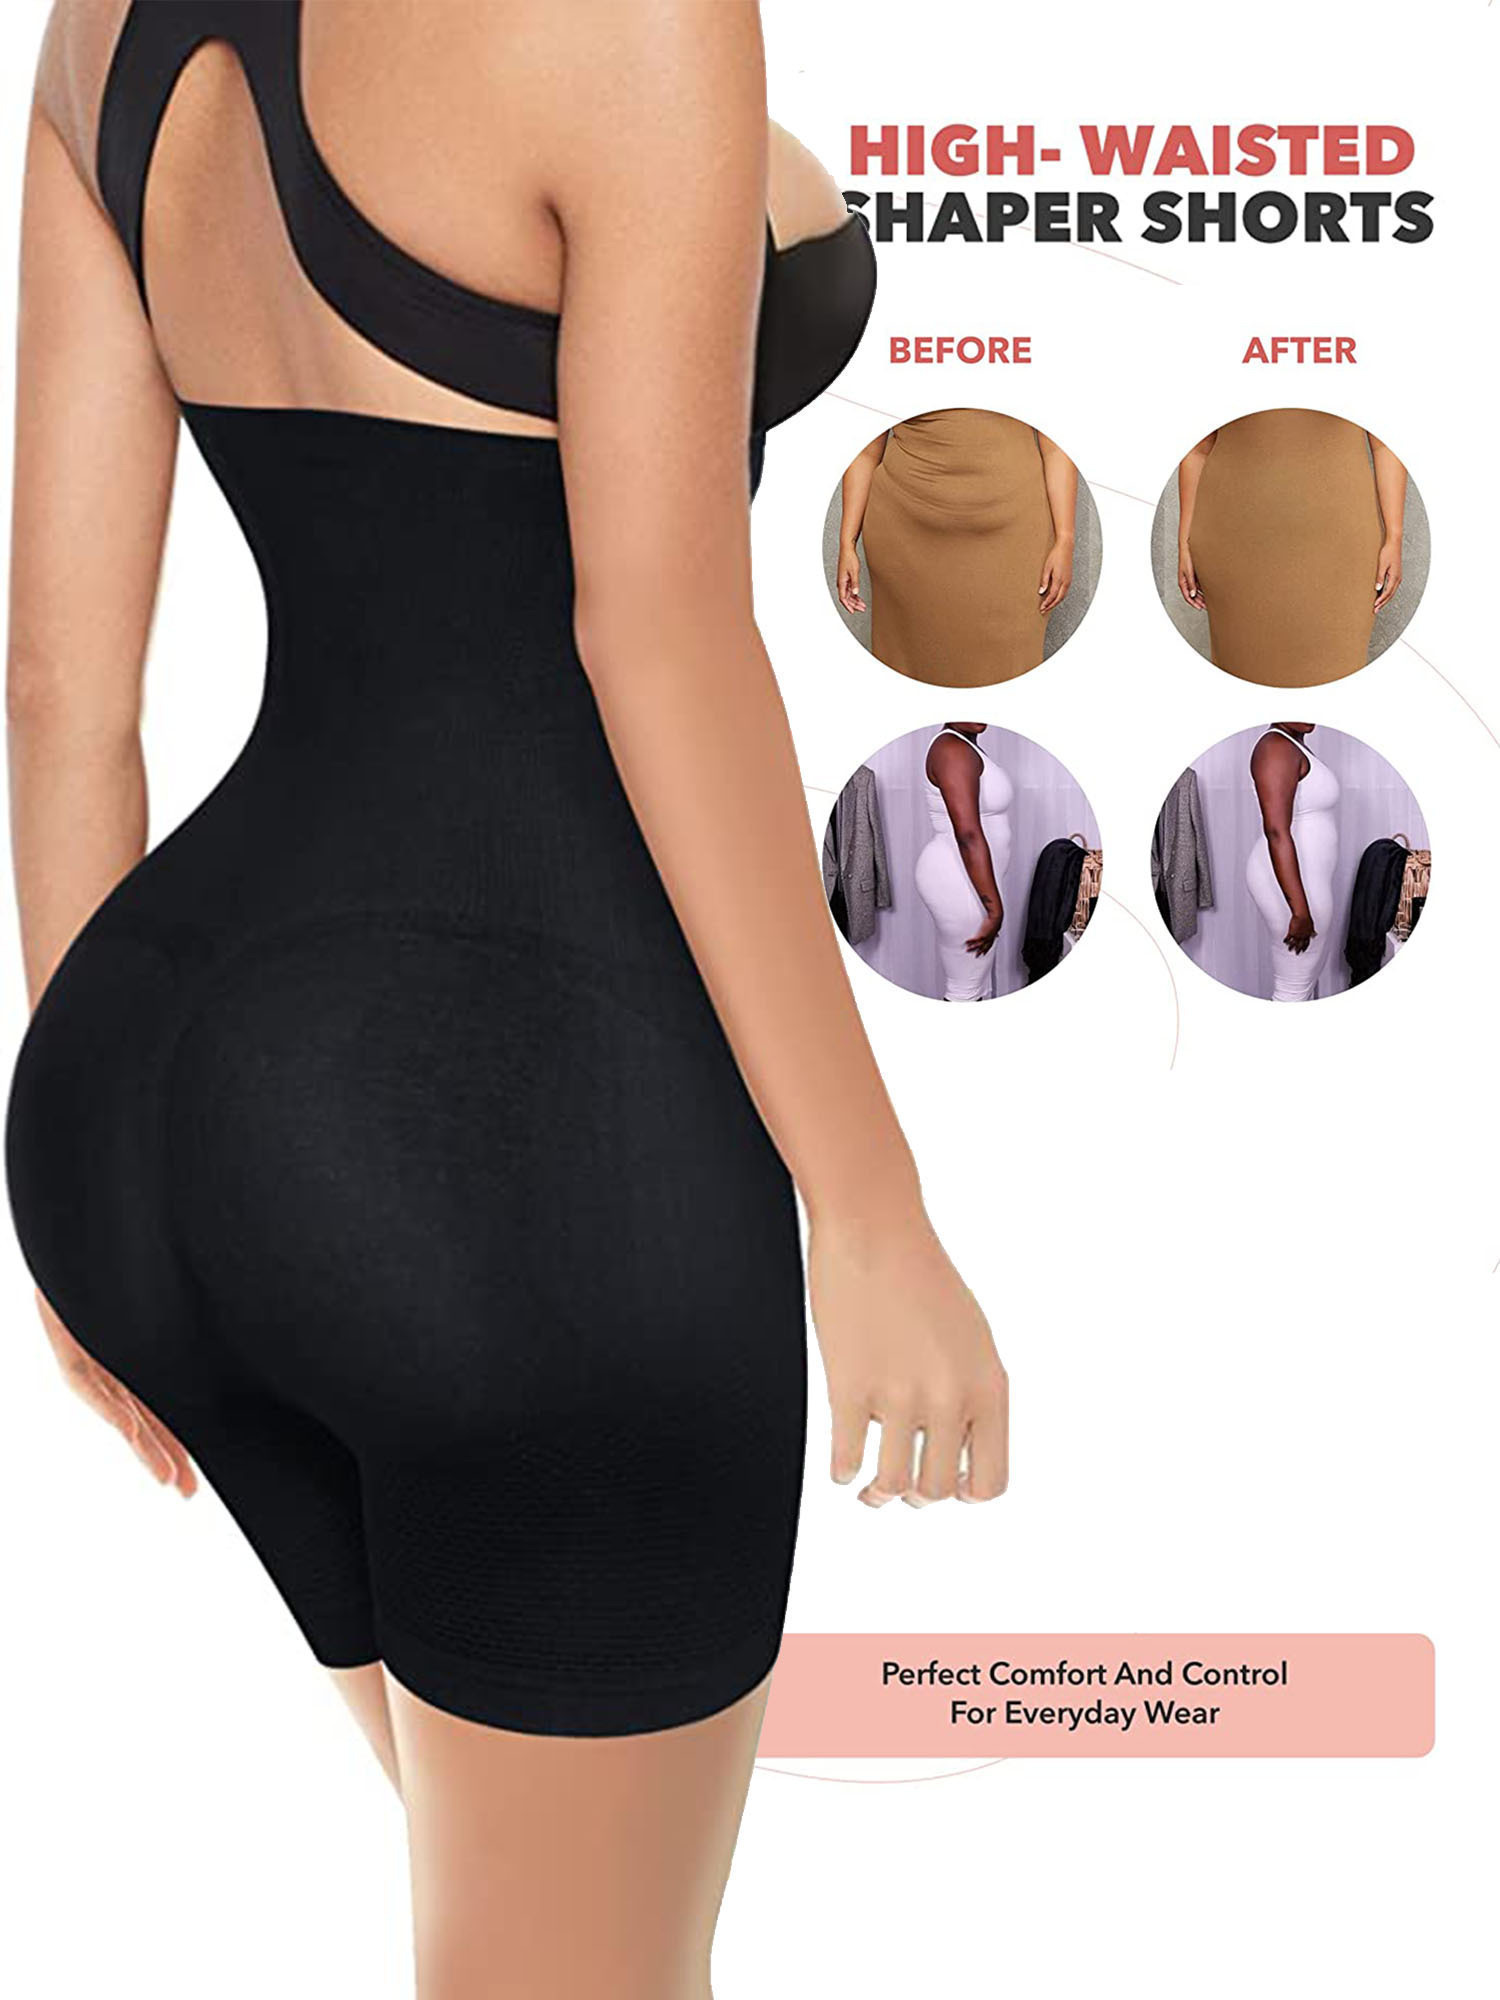 Shapewear Body Suits for Women Shorts High Waist High Compression